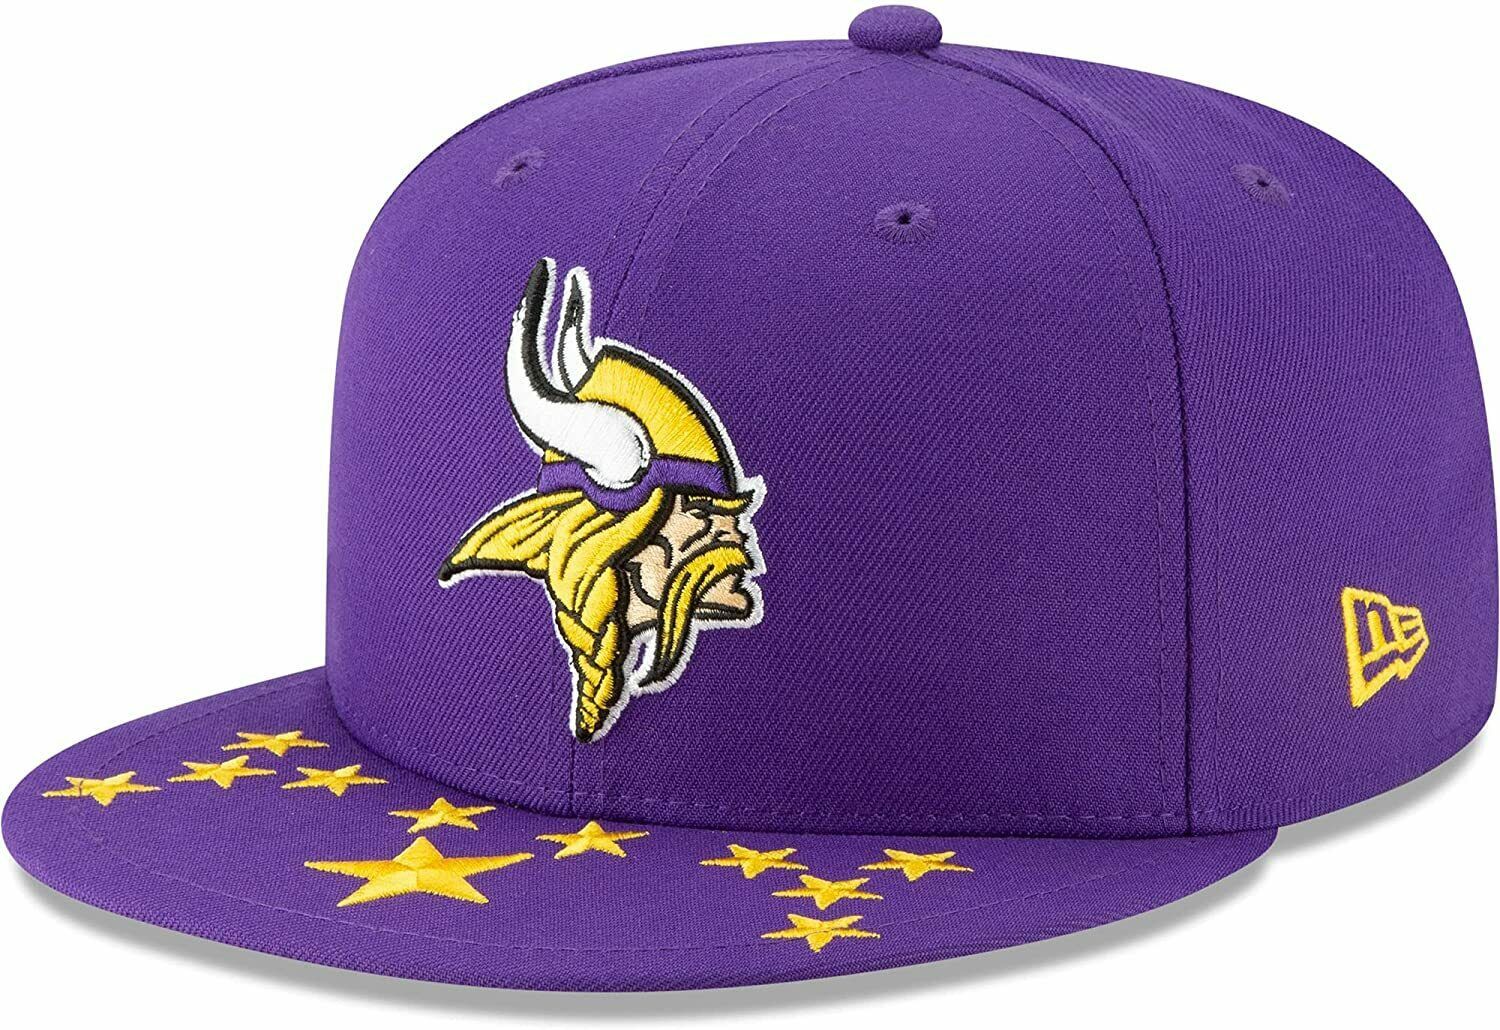 MINNESOTA VIKINGS NFL New Era 59FIFTY 2019 DRAFT ON-STAGE Hat Fitted 7 1/4 $38